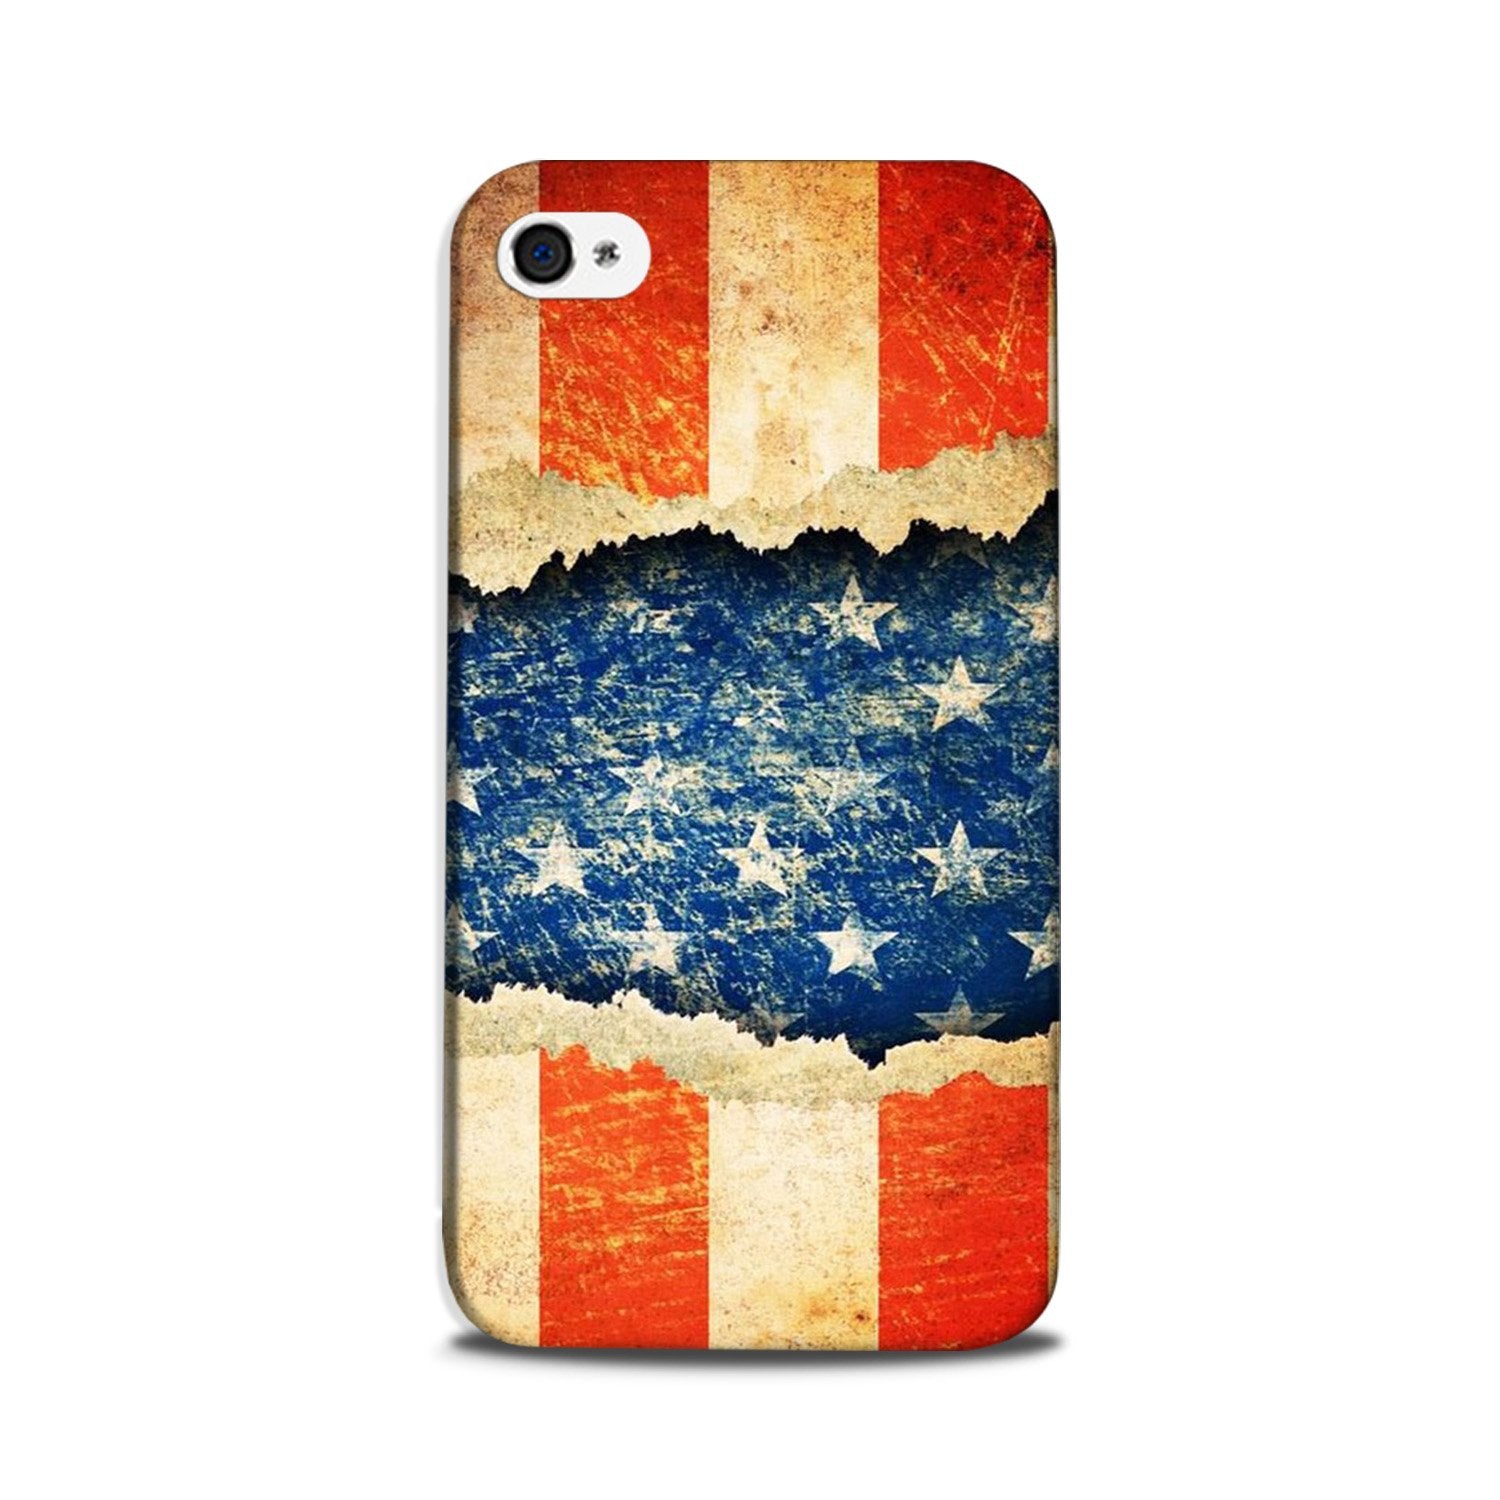 United Kingdom Case for iPhone 5/ 5s